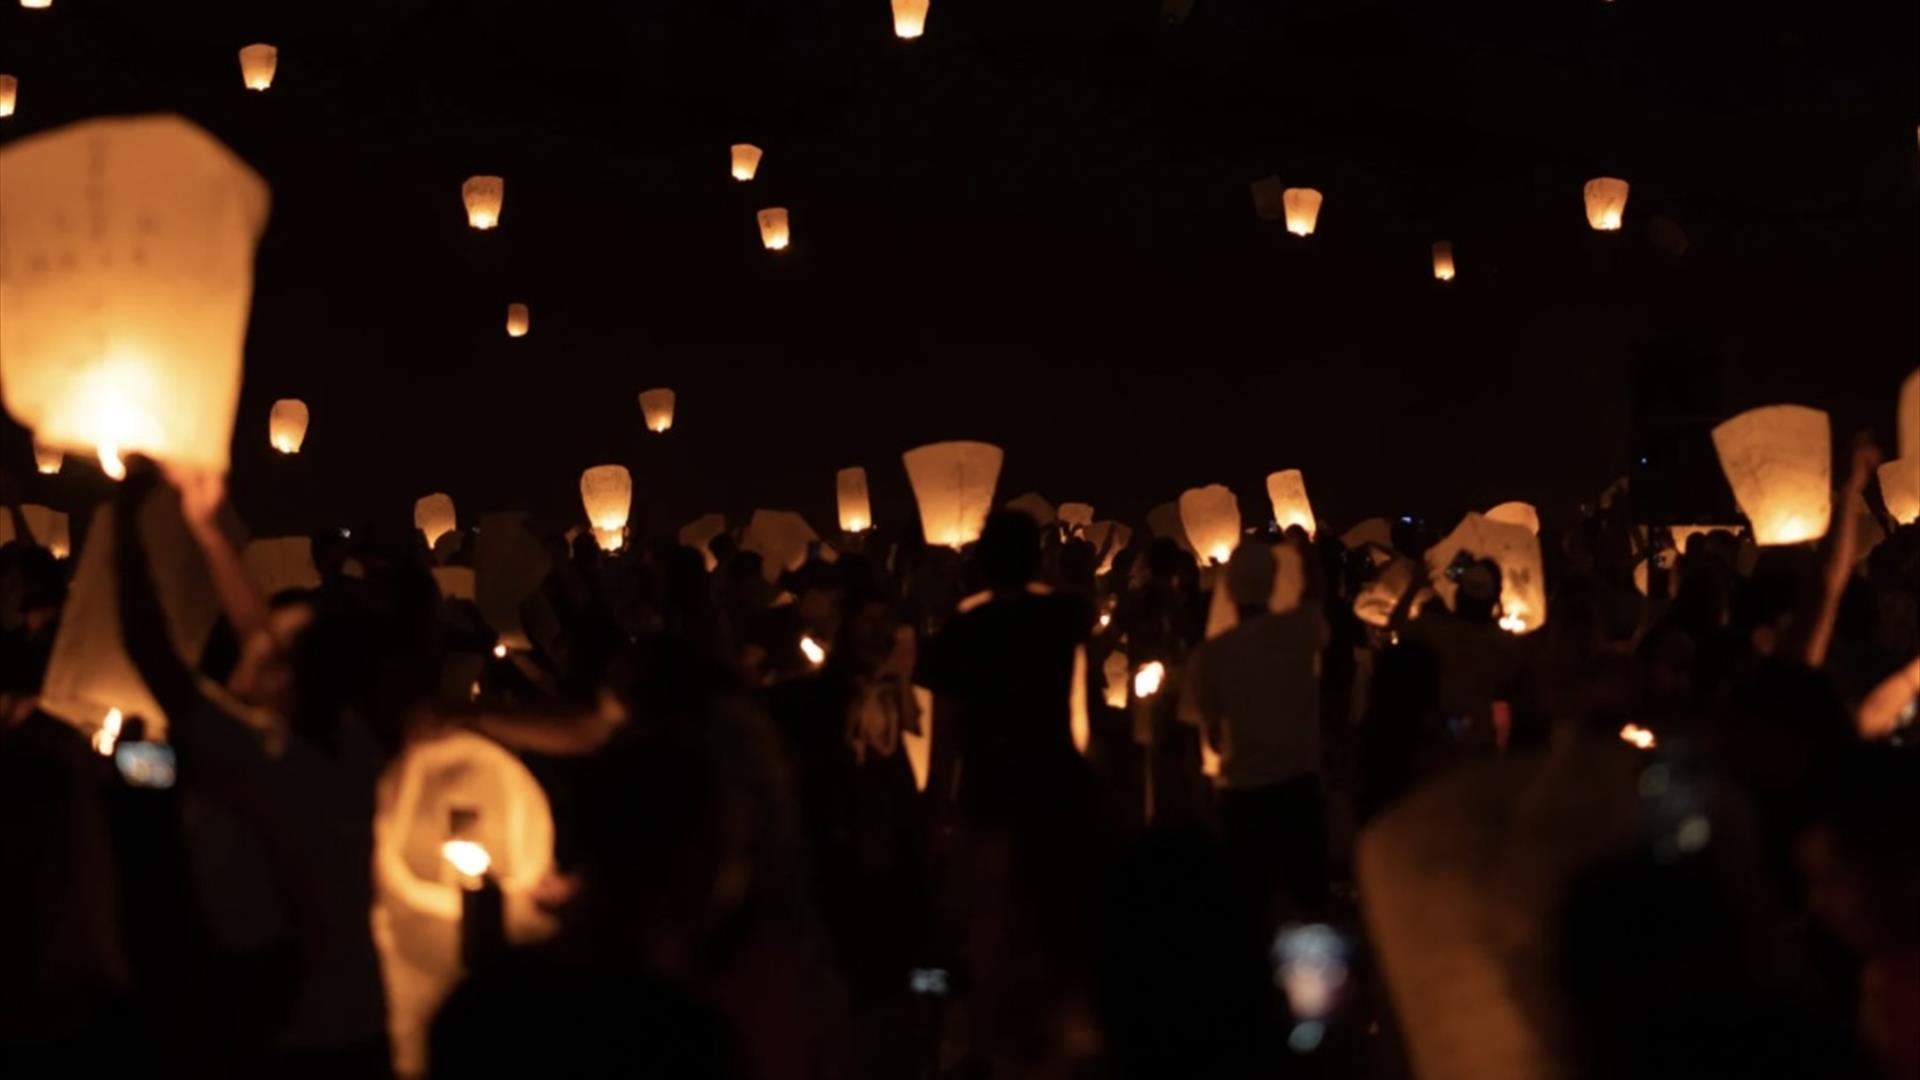 Photograph of floating halloween willow lanterns in the sky at night.